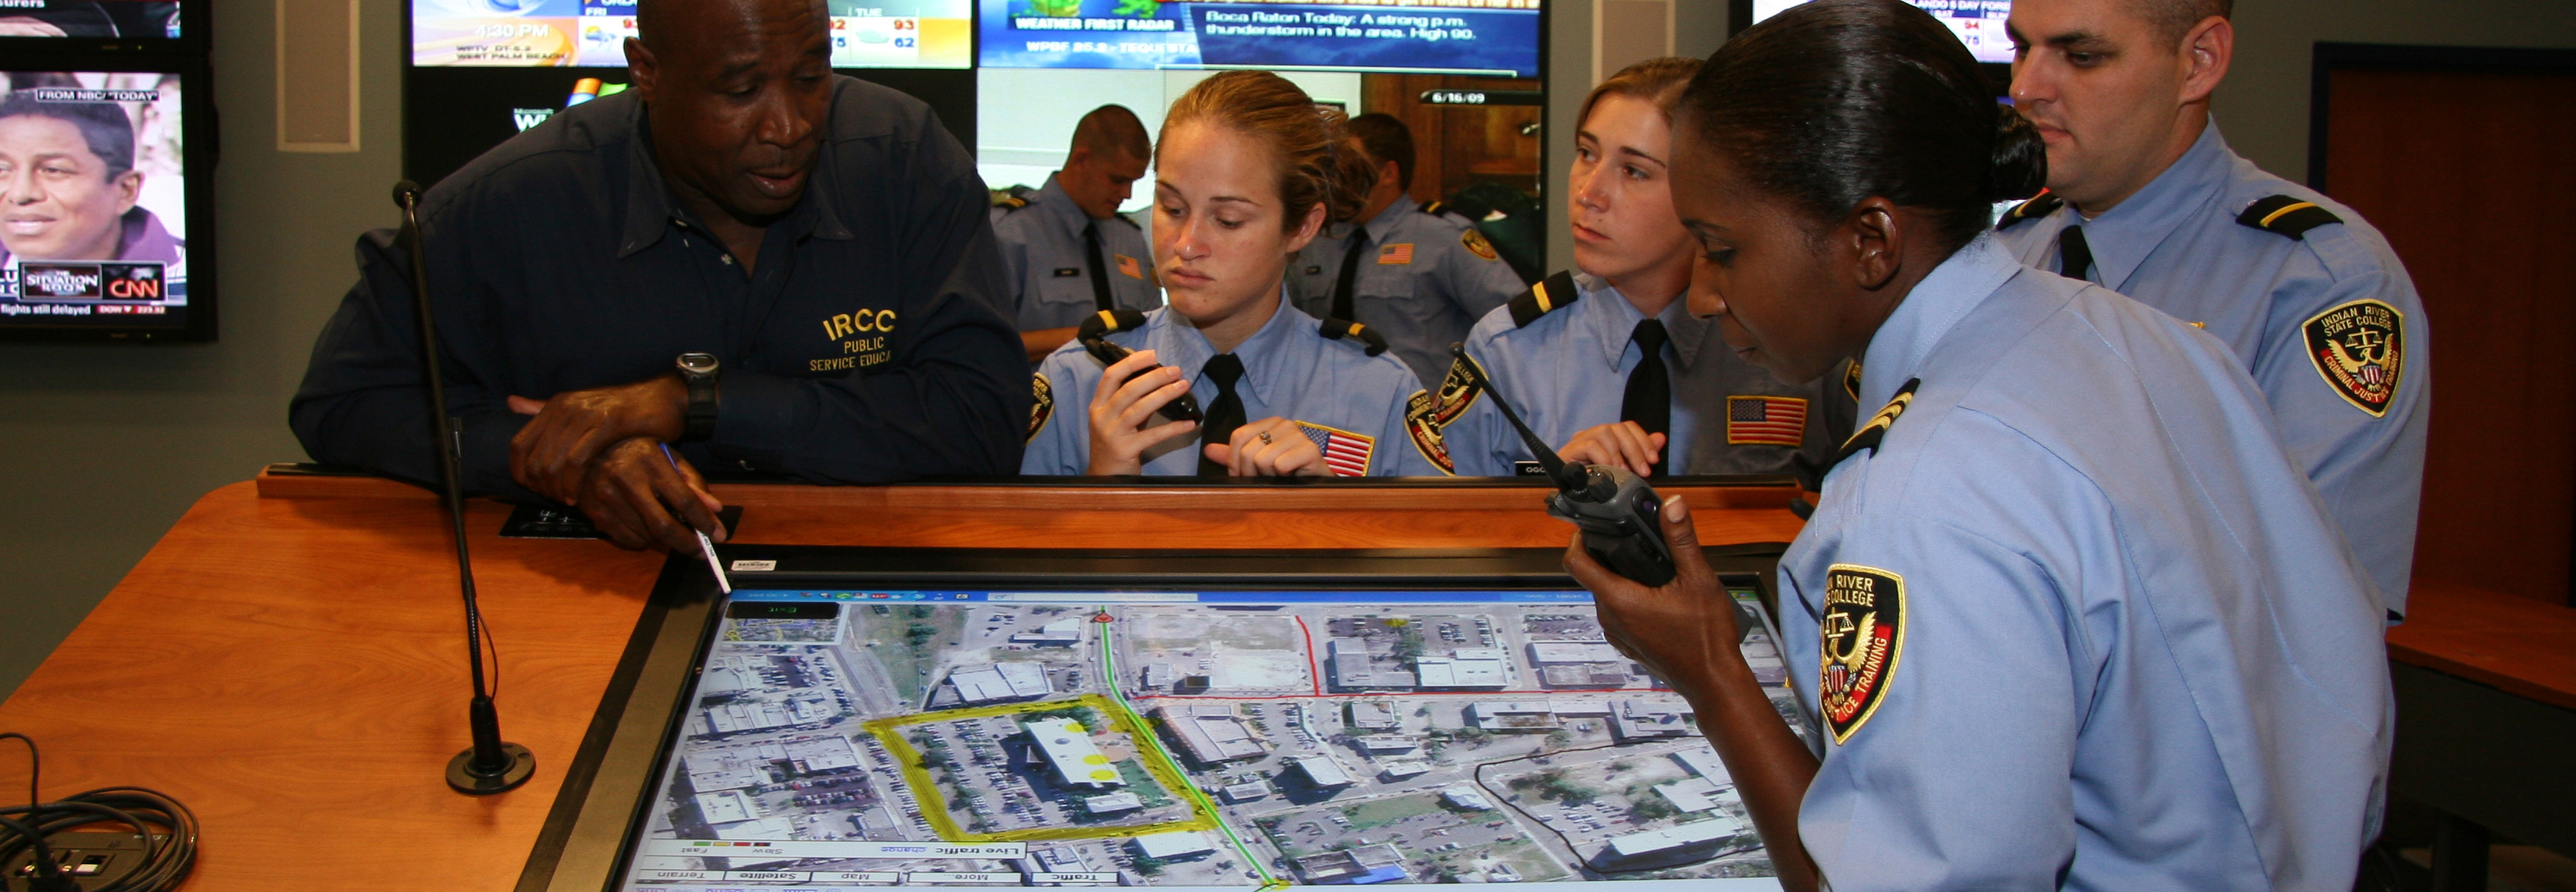 Students looking over screens in the Emergency Operations Center